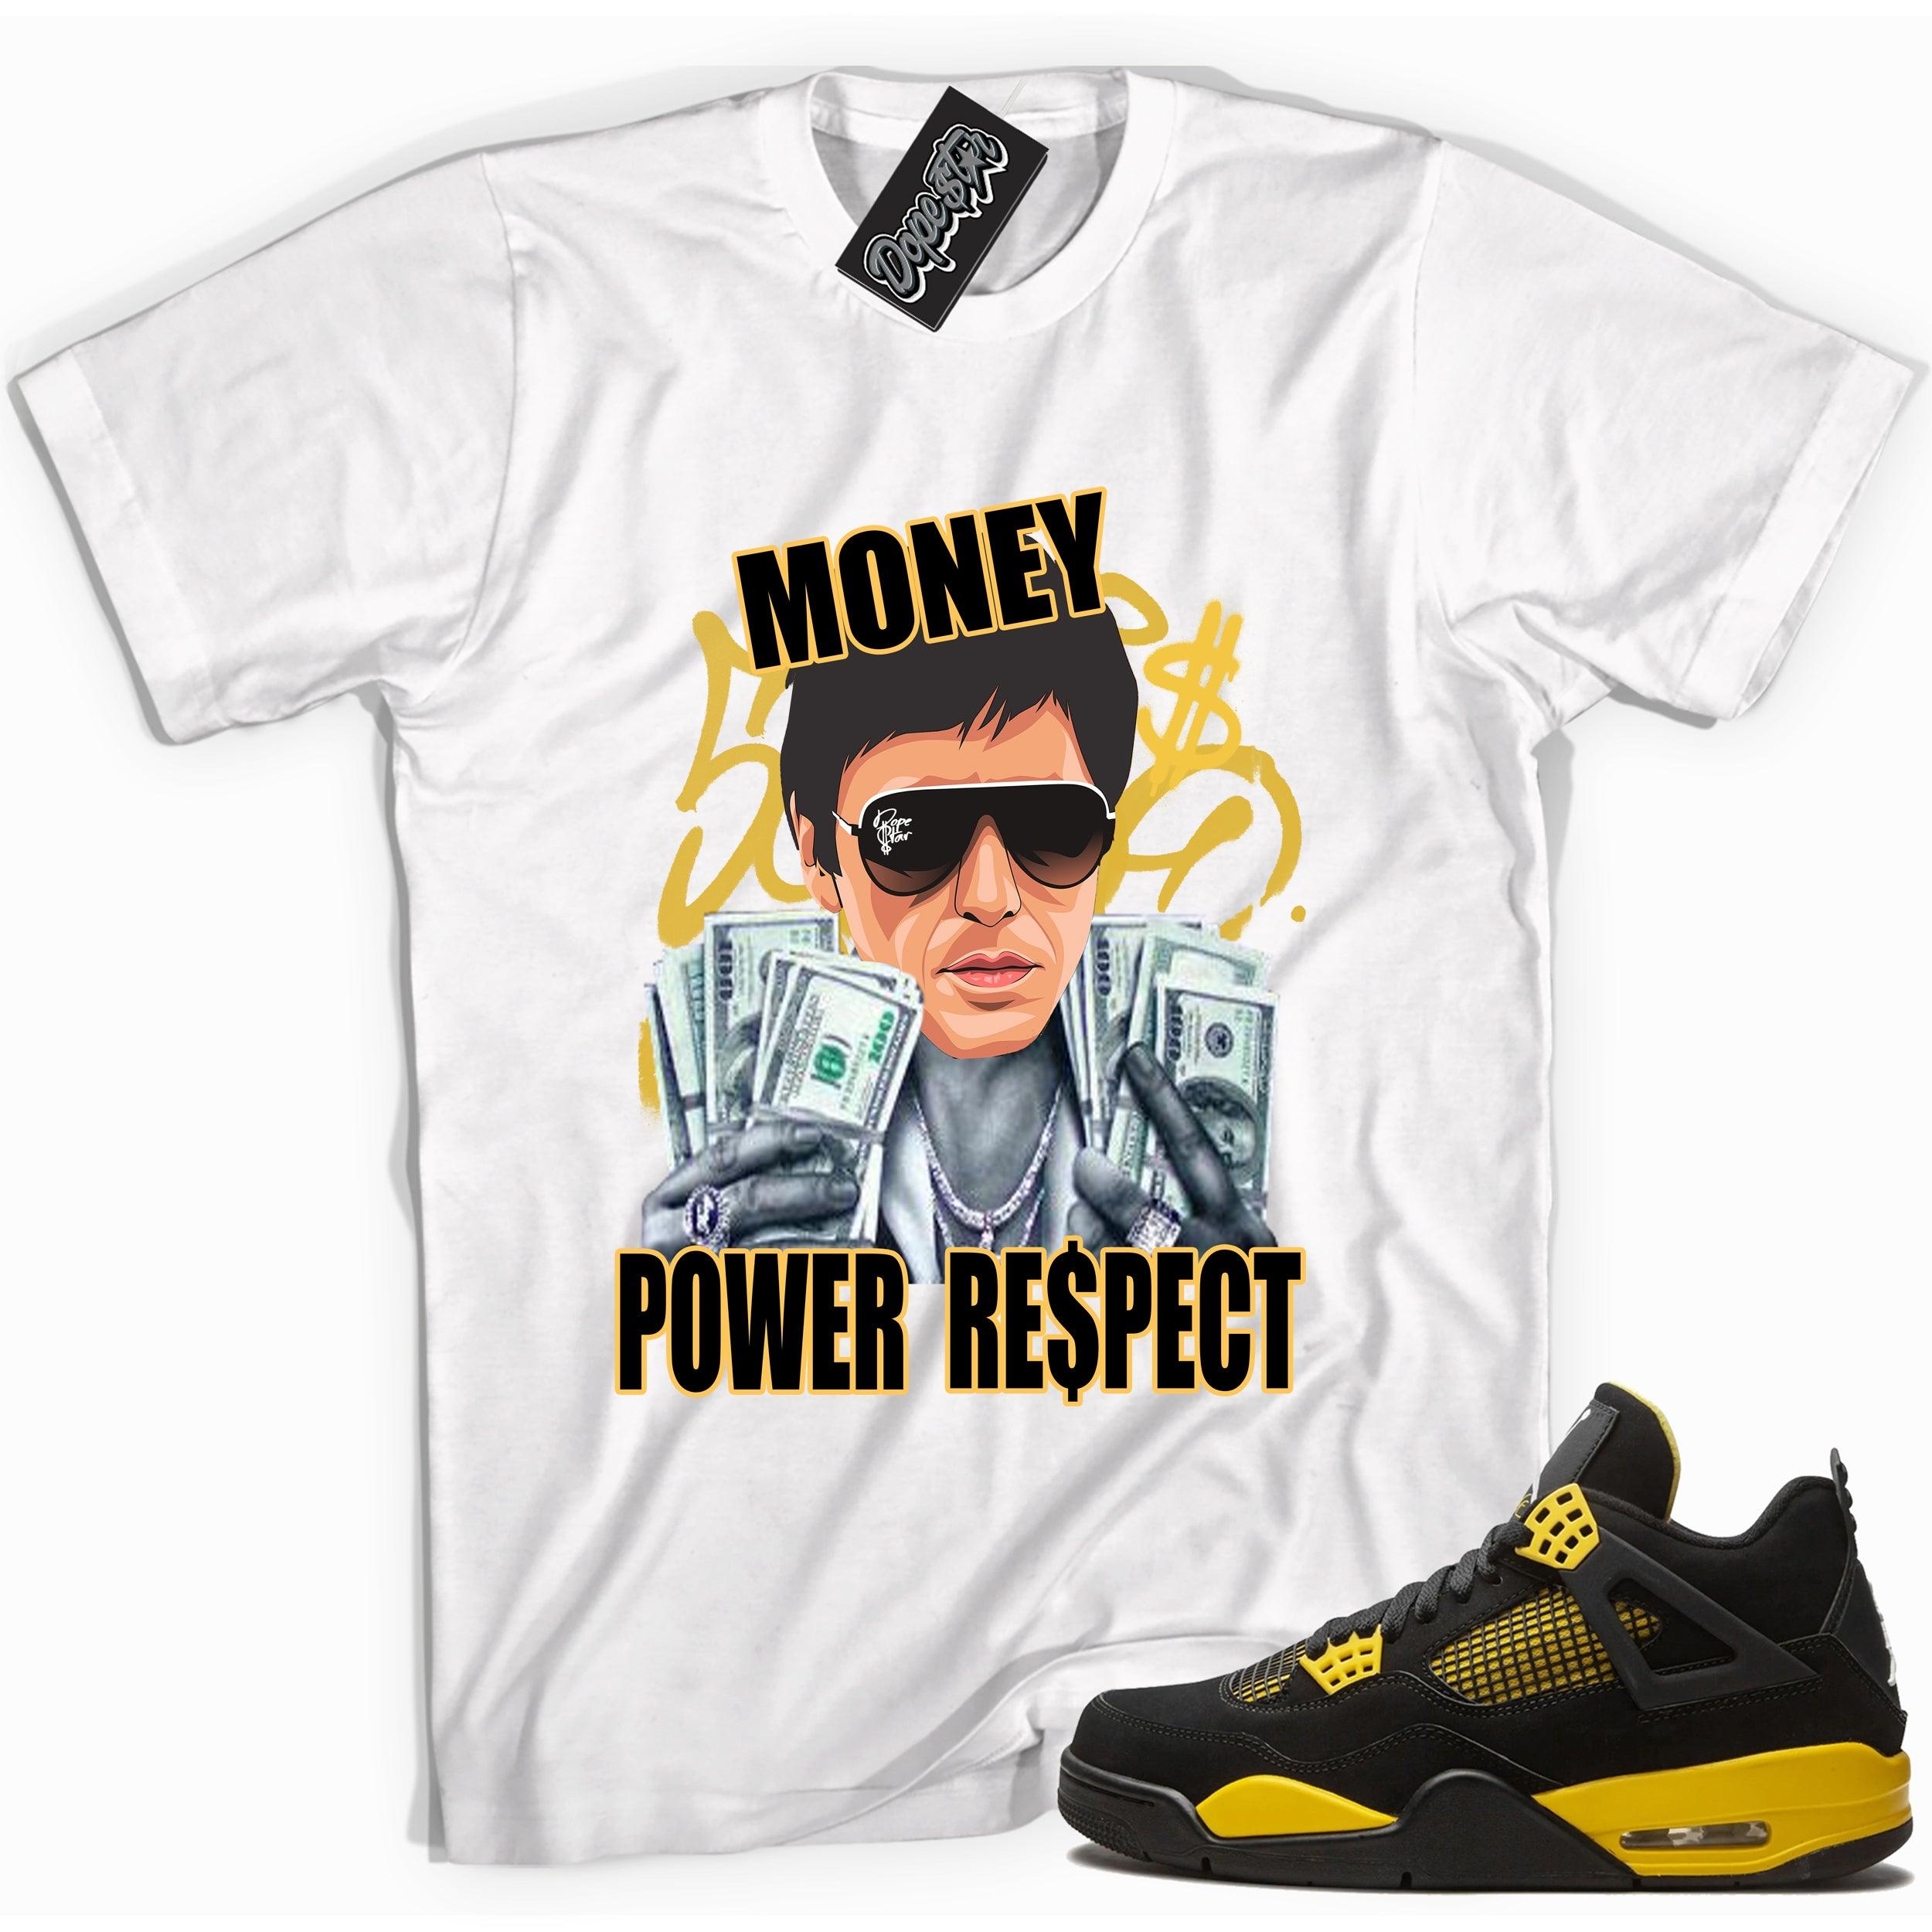 Cool white graphic tee with 'money power respect tony montana' print, that perfectly matches Air Jordan 4 Thunder sneakers